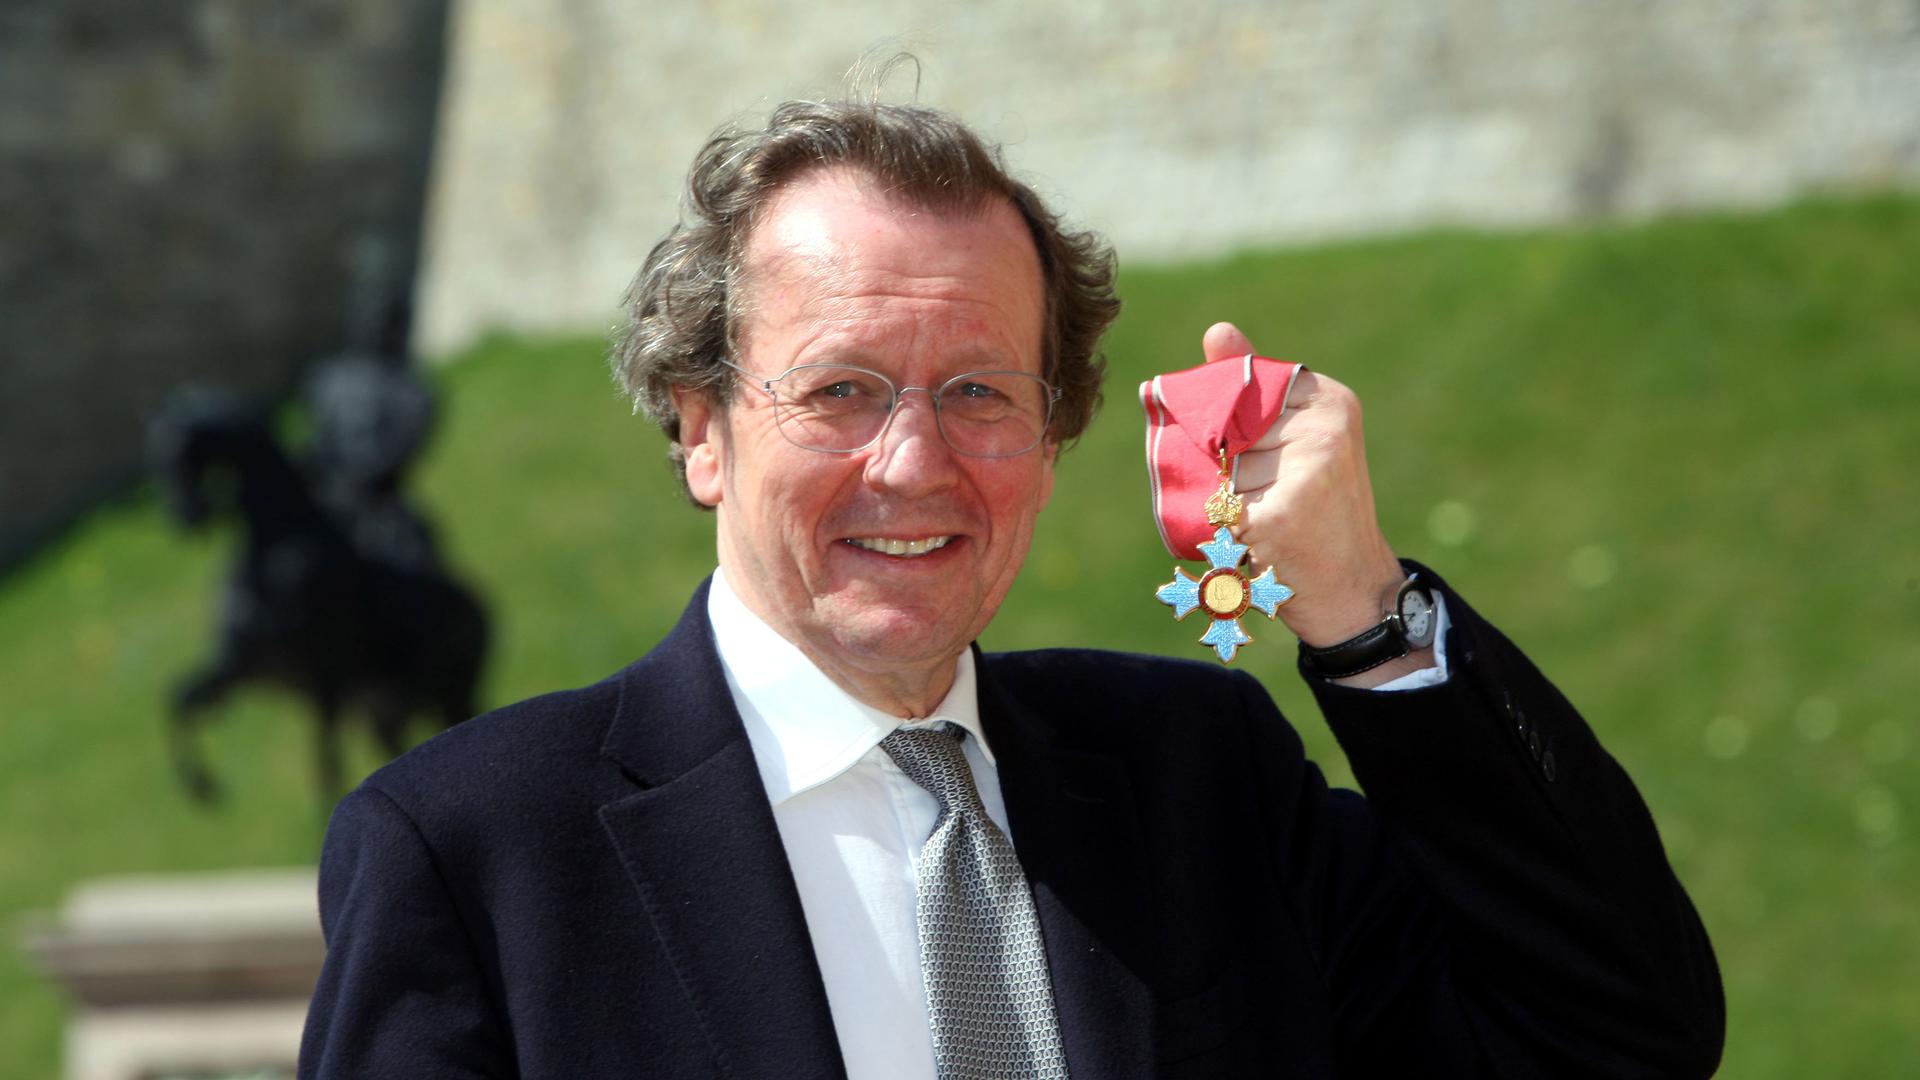 George Ferguson at a ceremony held at Windsor Castle on April 13, 2010 in Berkshire, England.